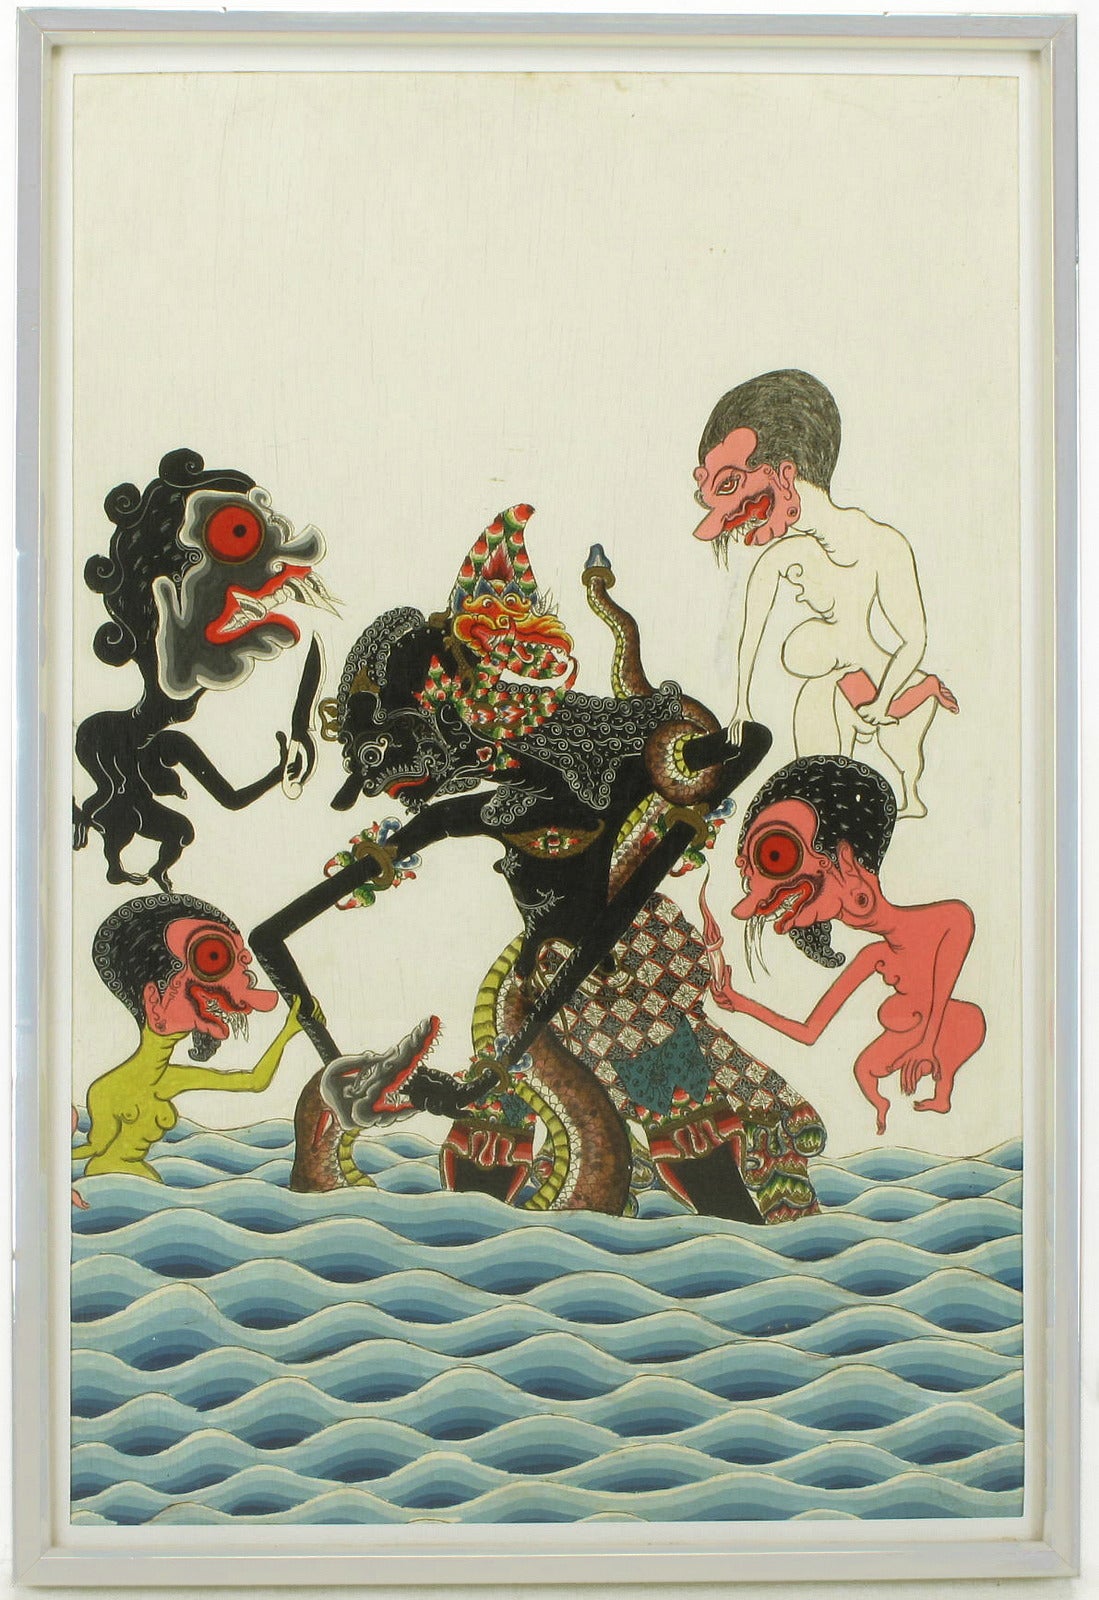 Acrylic paint and ink on board depicting the Javanese art of Waylan Kulit or Shadow Puppetry. The characters are mythological figures from the Javanese culture. Amazing detail, set in an anodized aluminum gallery style frame. Unsigned, measures 18